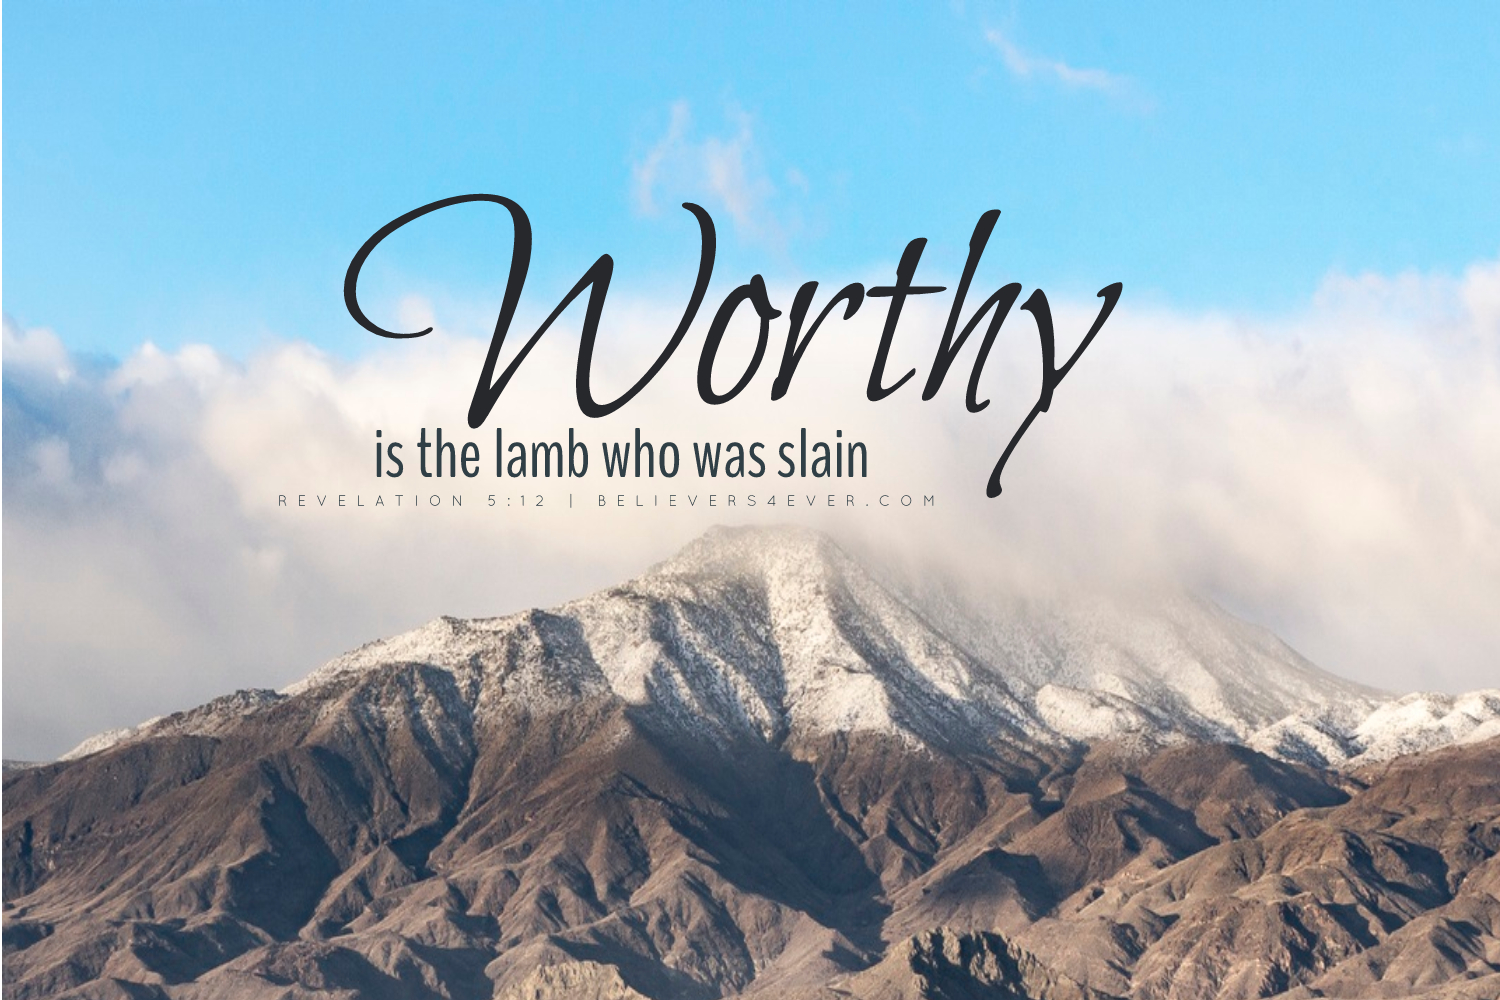 worthy is the lamb